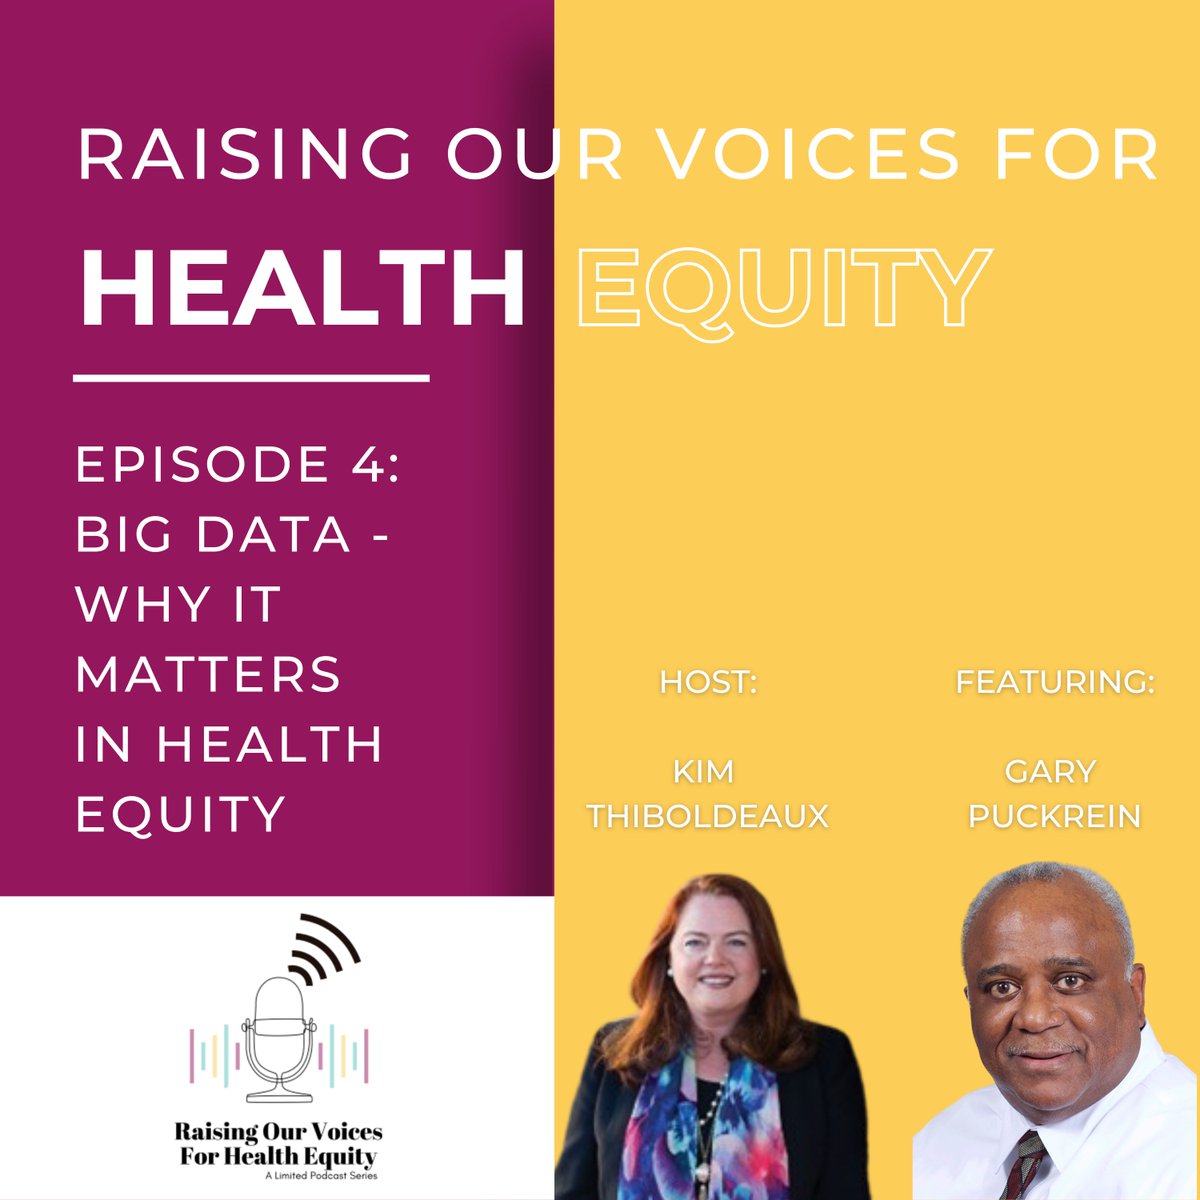 We are excited to release the fourth episode of “Raising Our Voices for Health Equity” with Dr. Gary Puckrein, founding President and Chief Executive Officer of the National Minority Quality Forum (NMQF).